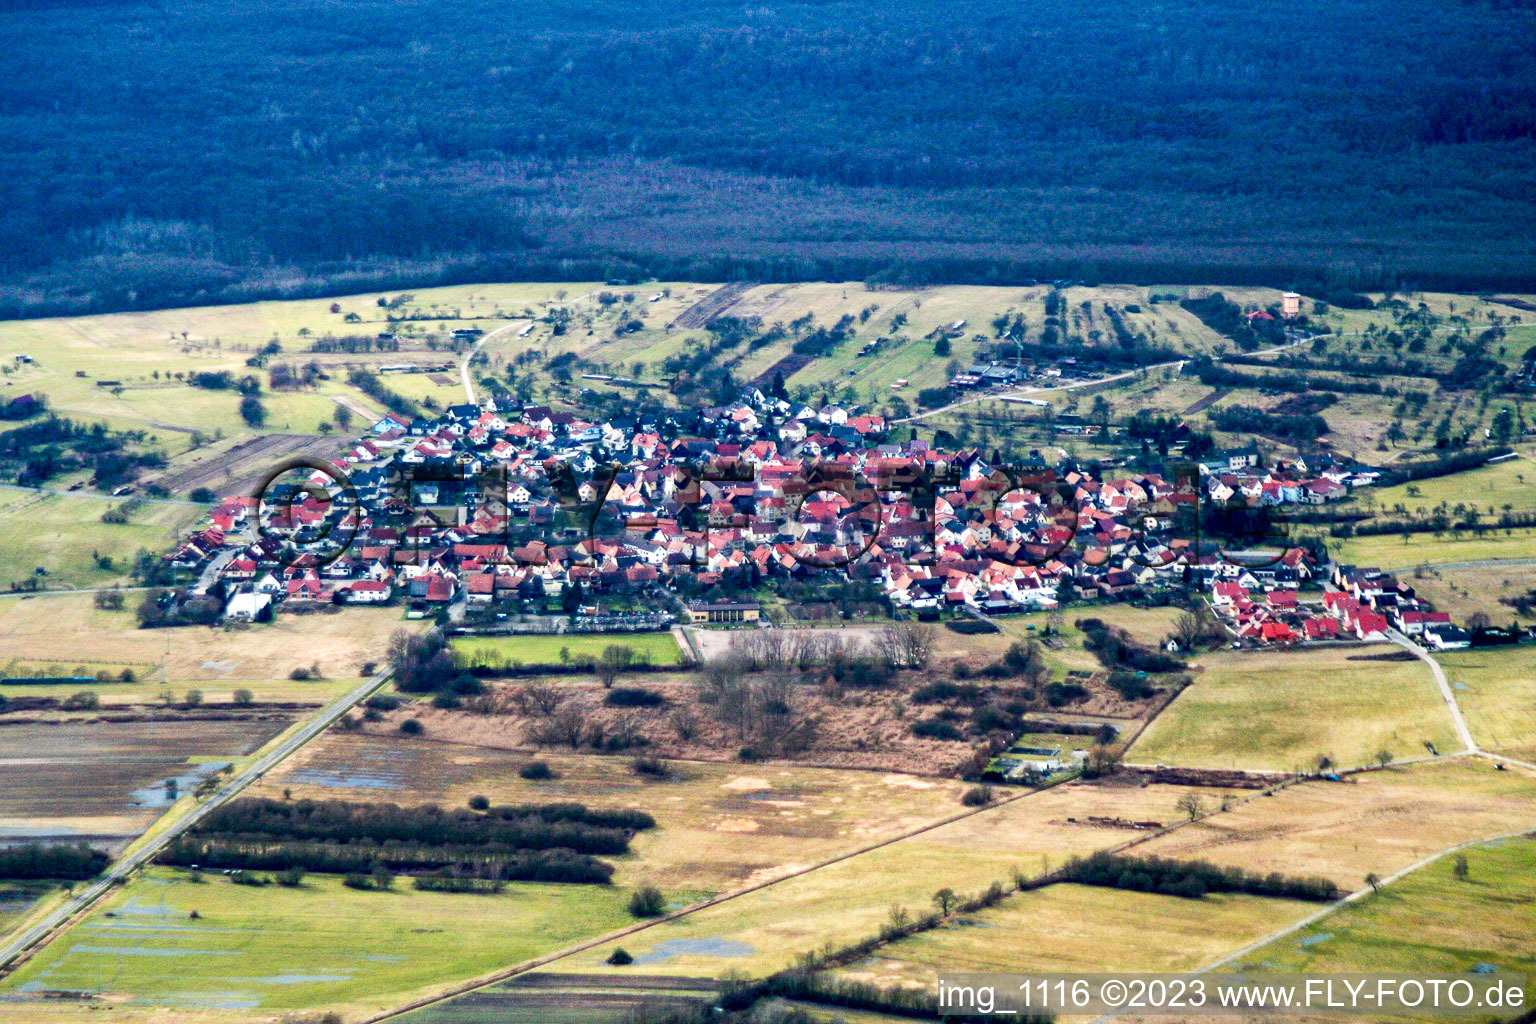 District Büchelberg in Wörth am Rhein in the state Rhineland-Palatinate, Germany seen from a drone